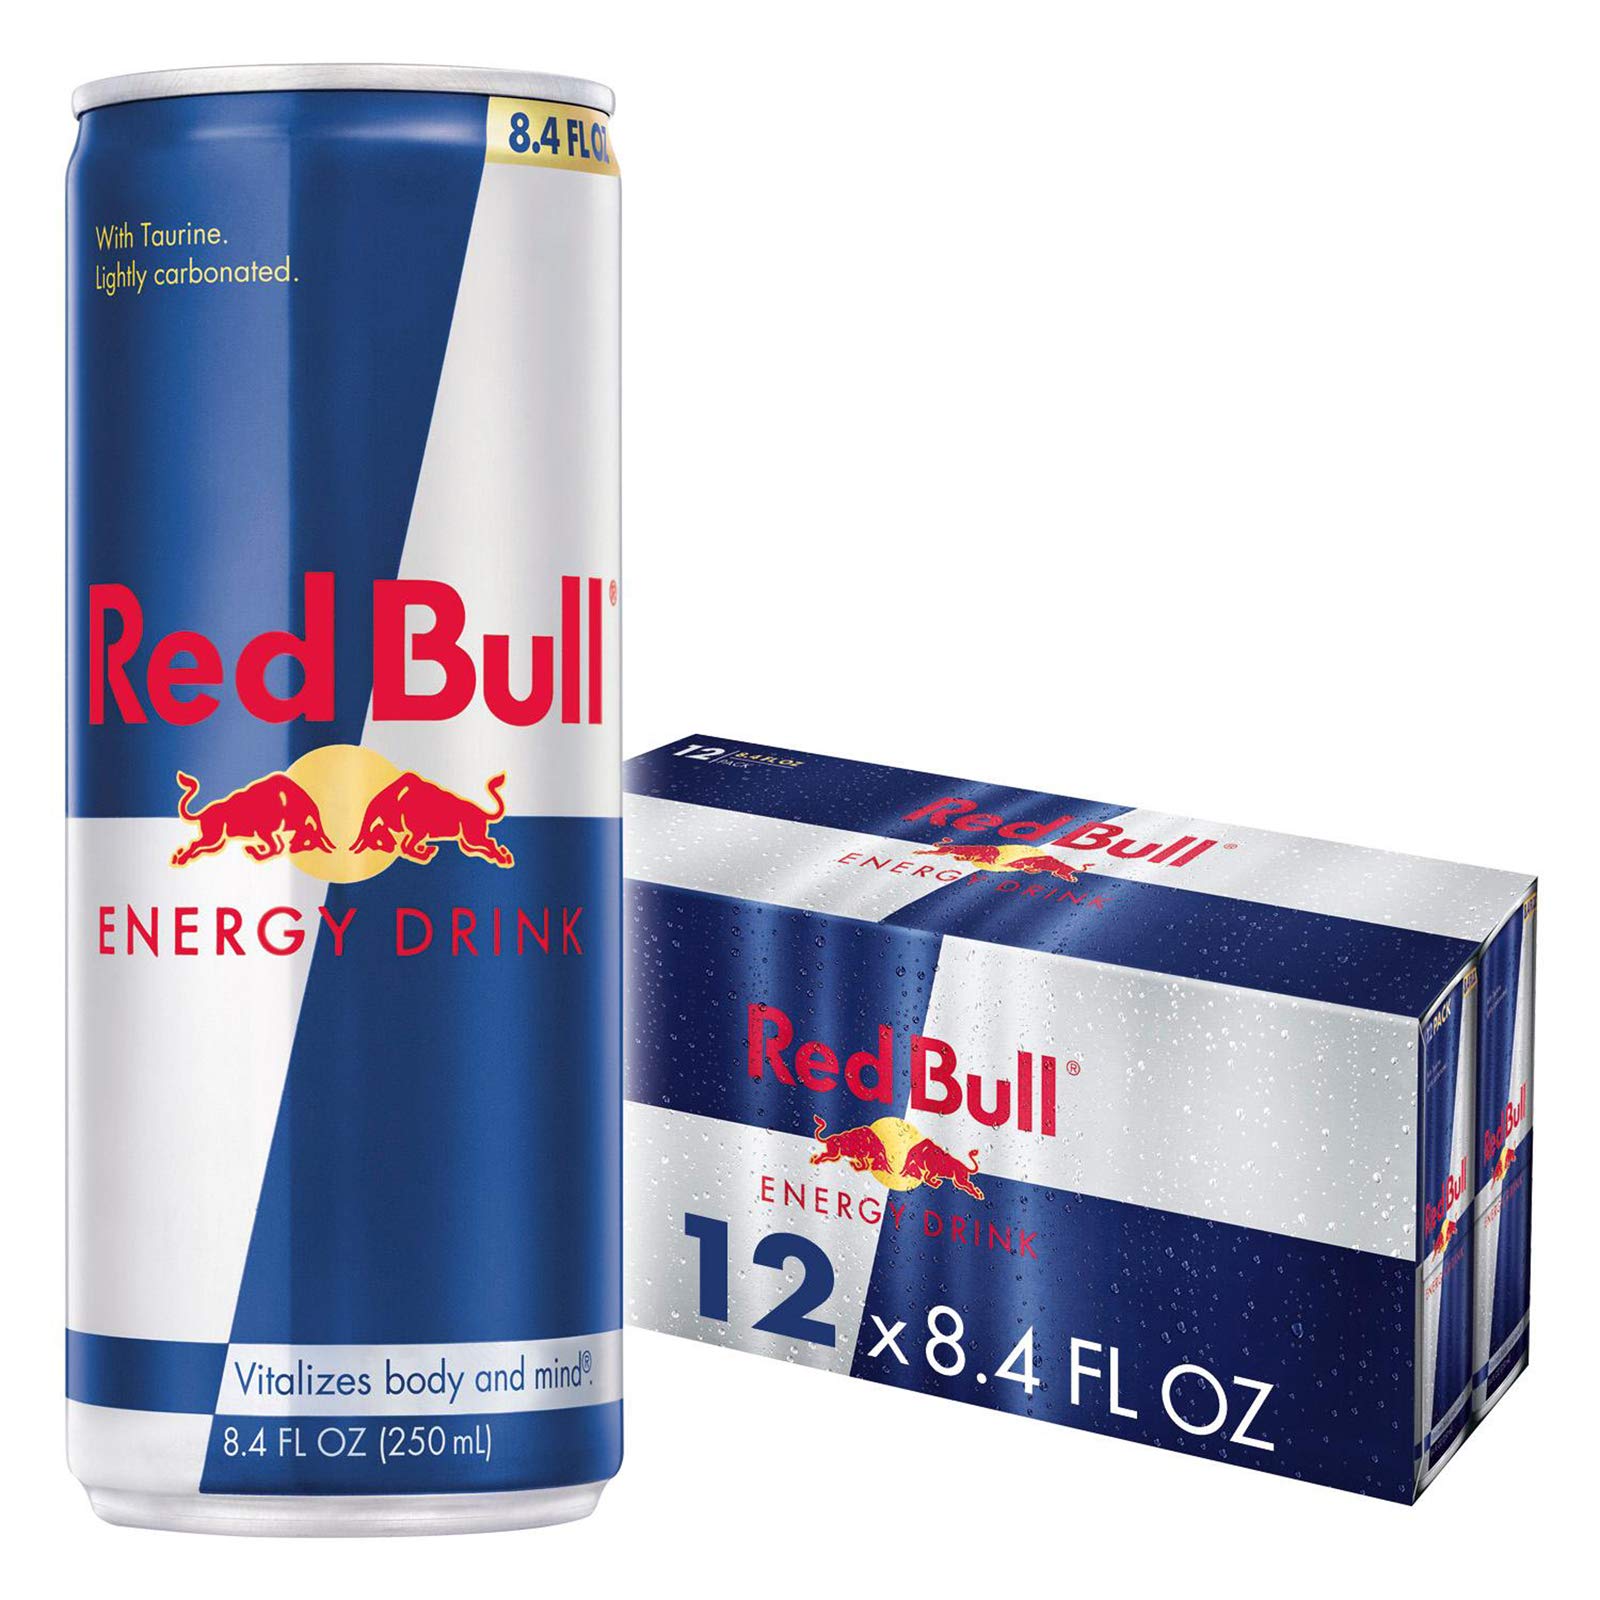 Red Bull Energy Drink, 8.4FL Oz, 12 count $13.81 as low as $12.82 + tax